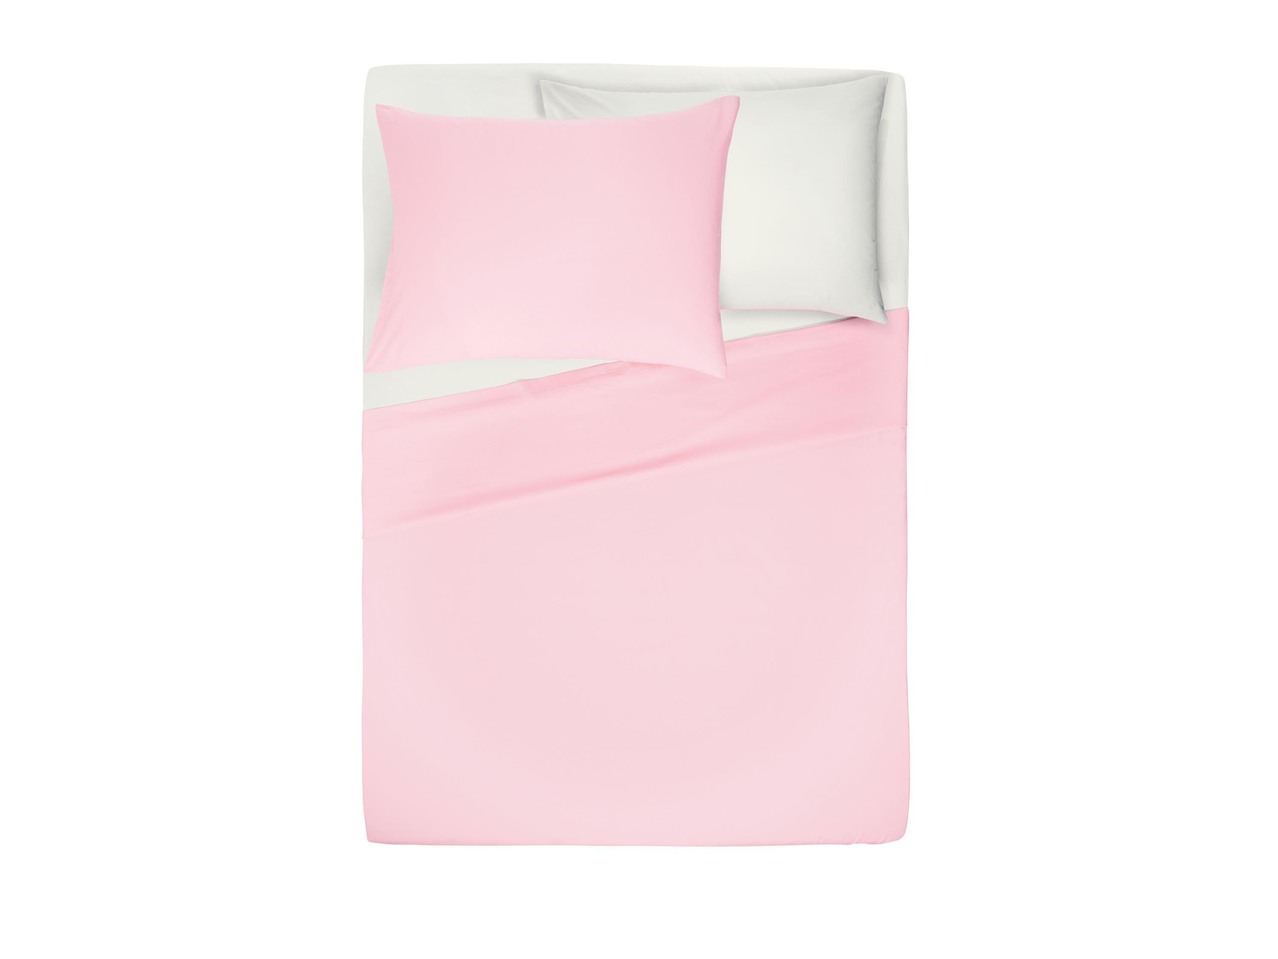 Bedlinen Set, One and a Half Size